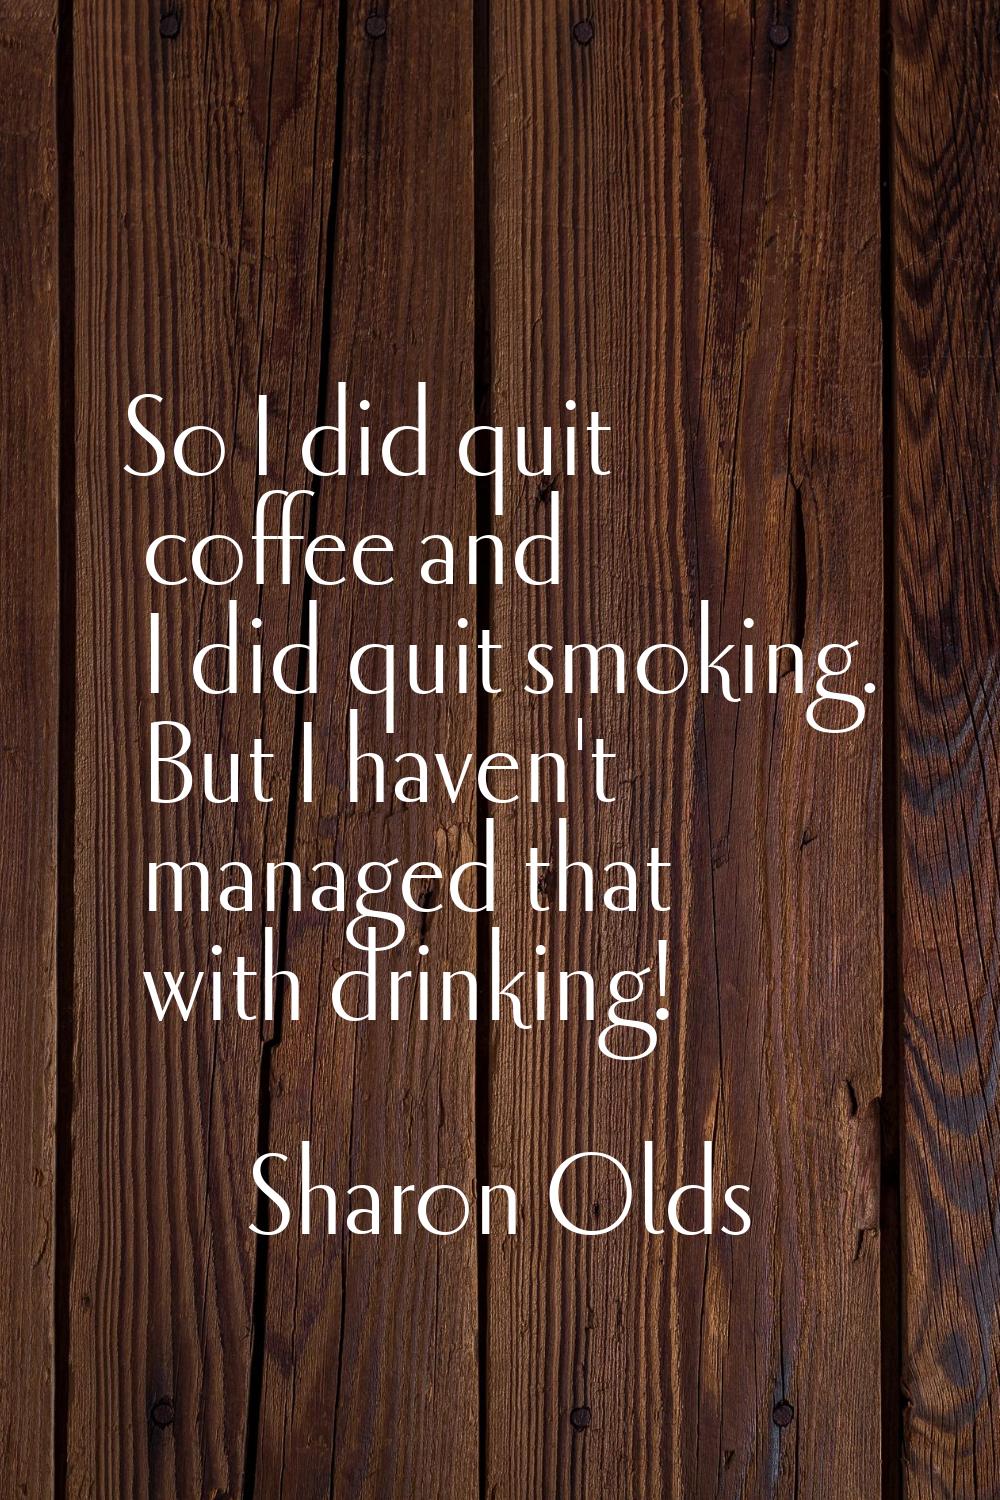 So I did quit coffee and I did quit smoking. But I haven't managed that with drinking!